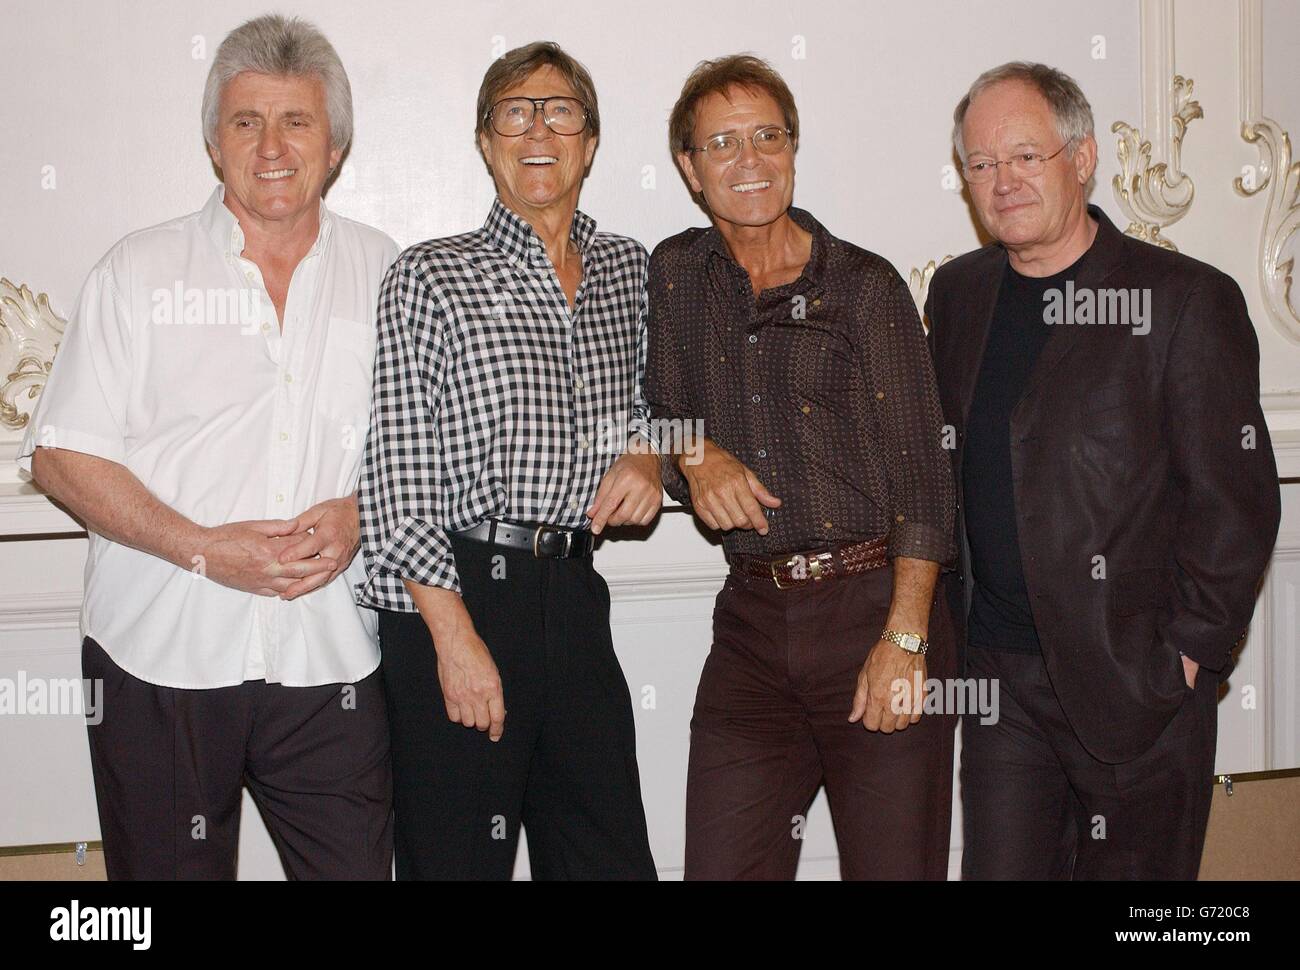 Sir Cliff Richard (second right) with the Shadows, (from left) Bruce Welch, Hank B Marvin and Brian Bennett at the London Palladium, ahead of their final concert appearance together, which will see Sir Cliff sing three numbers. Band members Marvin, Bruce Welch and Brian Bennett have been touring the UK for the last time in their 45-year career, playing 37 sellout dates before their last ever performance. The group are holding gold discs to mark more than 100,000 sales of their recent double CD Life Story - The Very Best Of The Shadows. Stock Photo